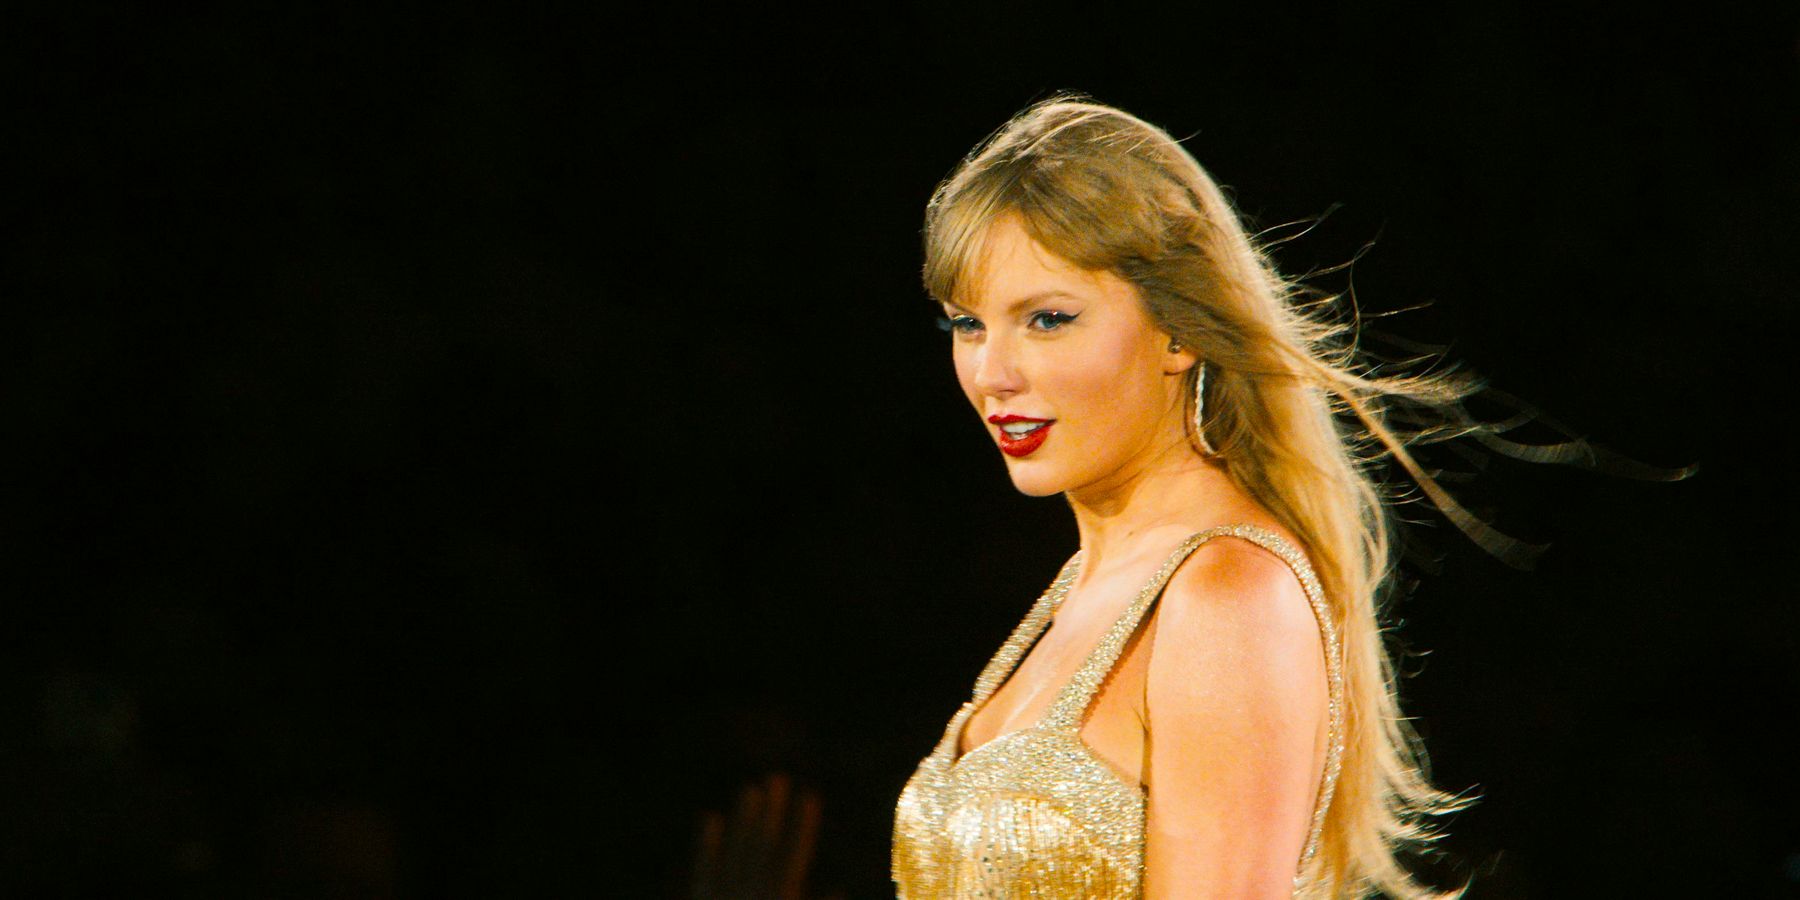 Taylor Swift: Every Track 5 Song, Ranked From Worst To Best